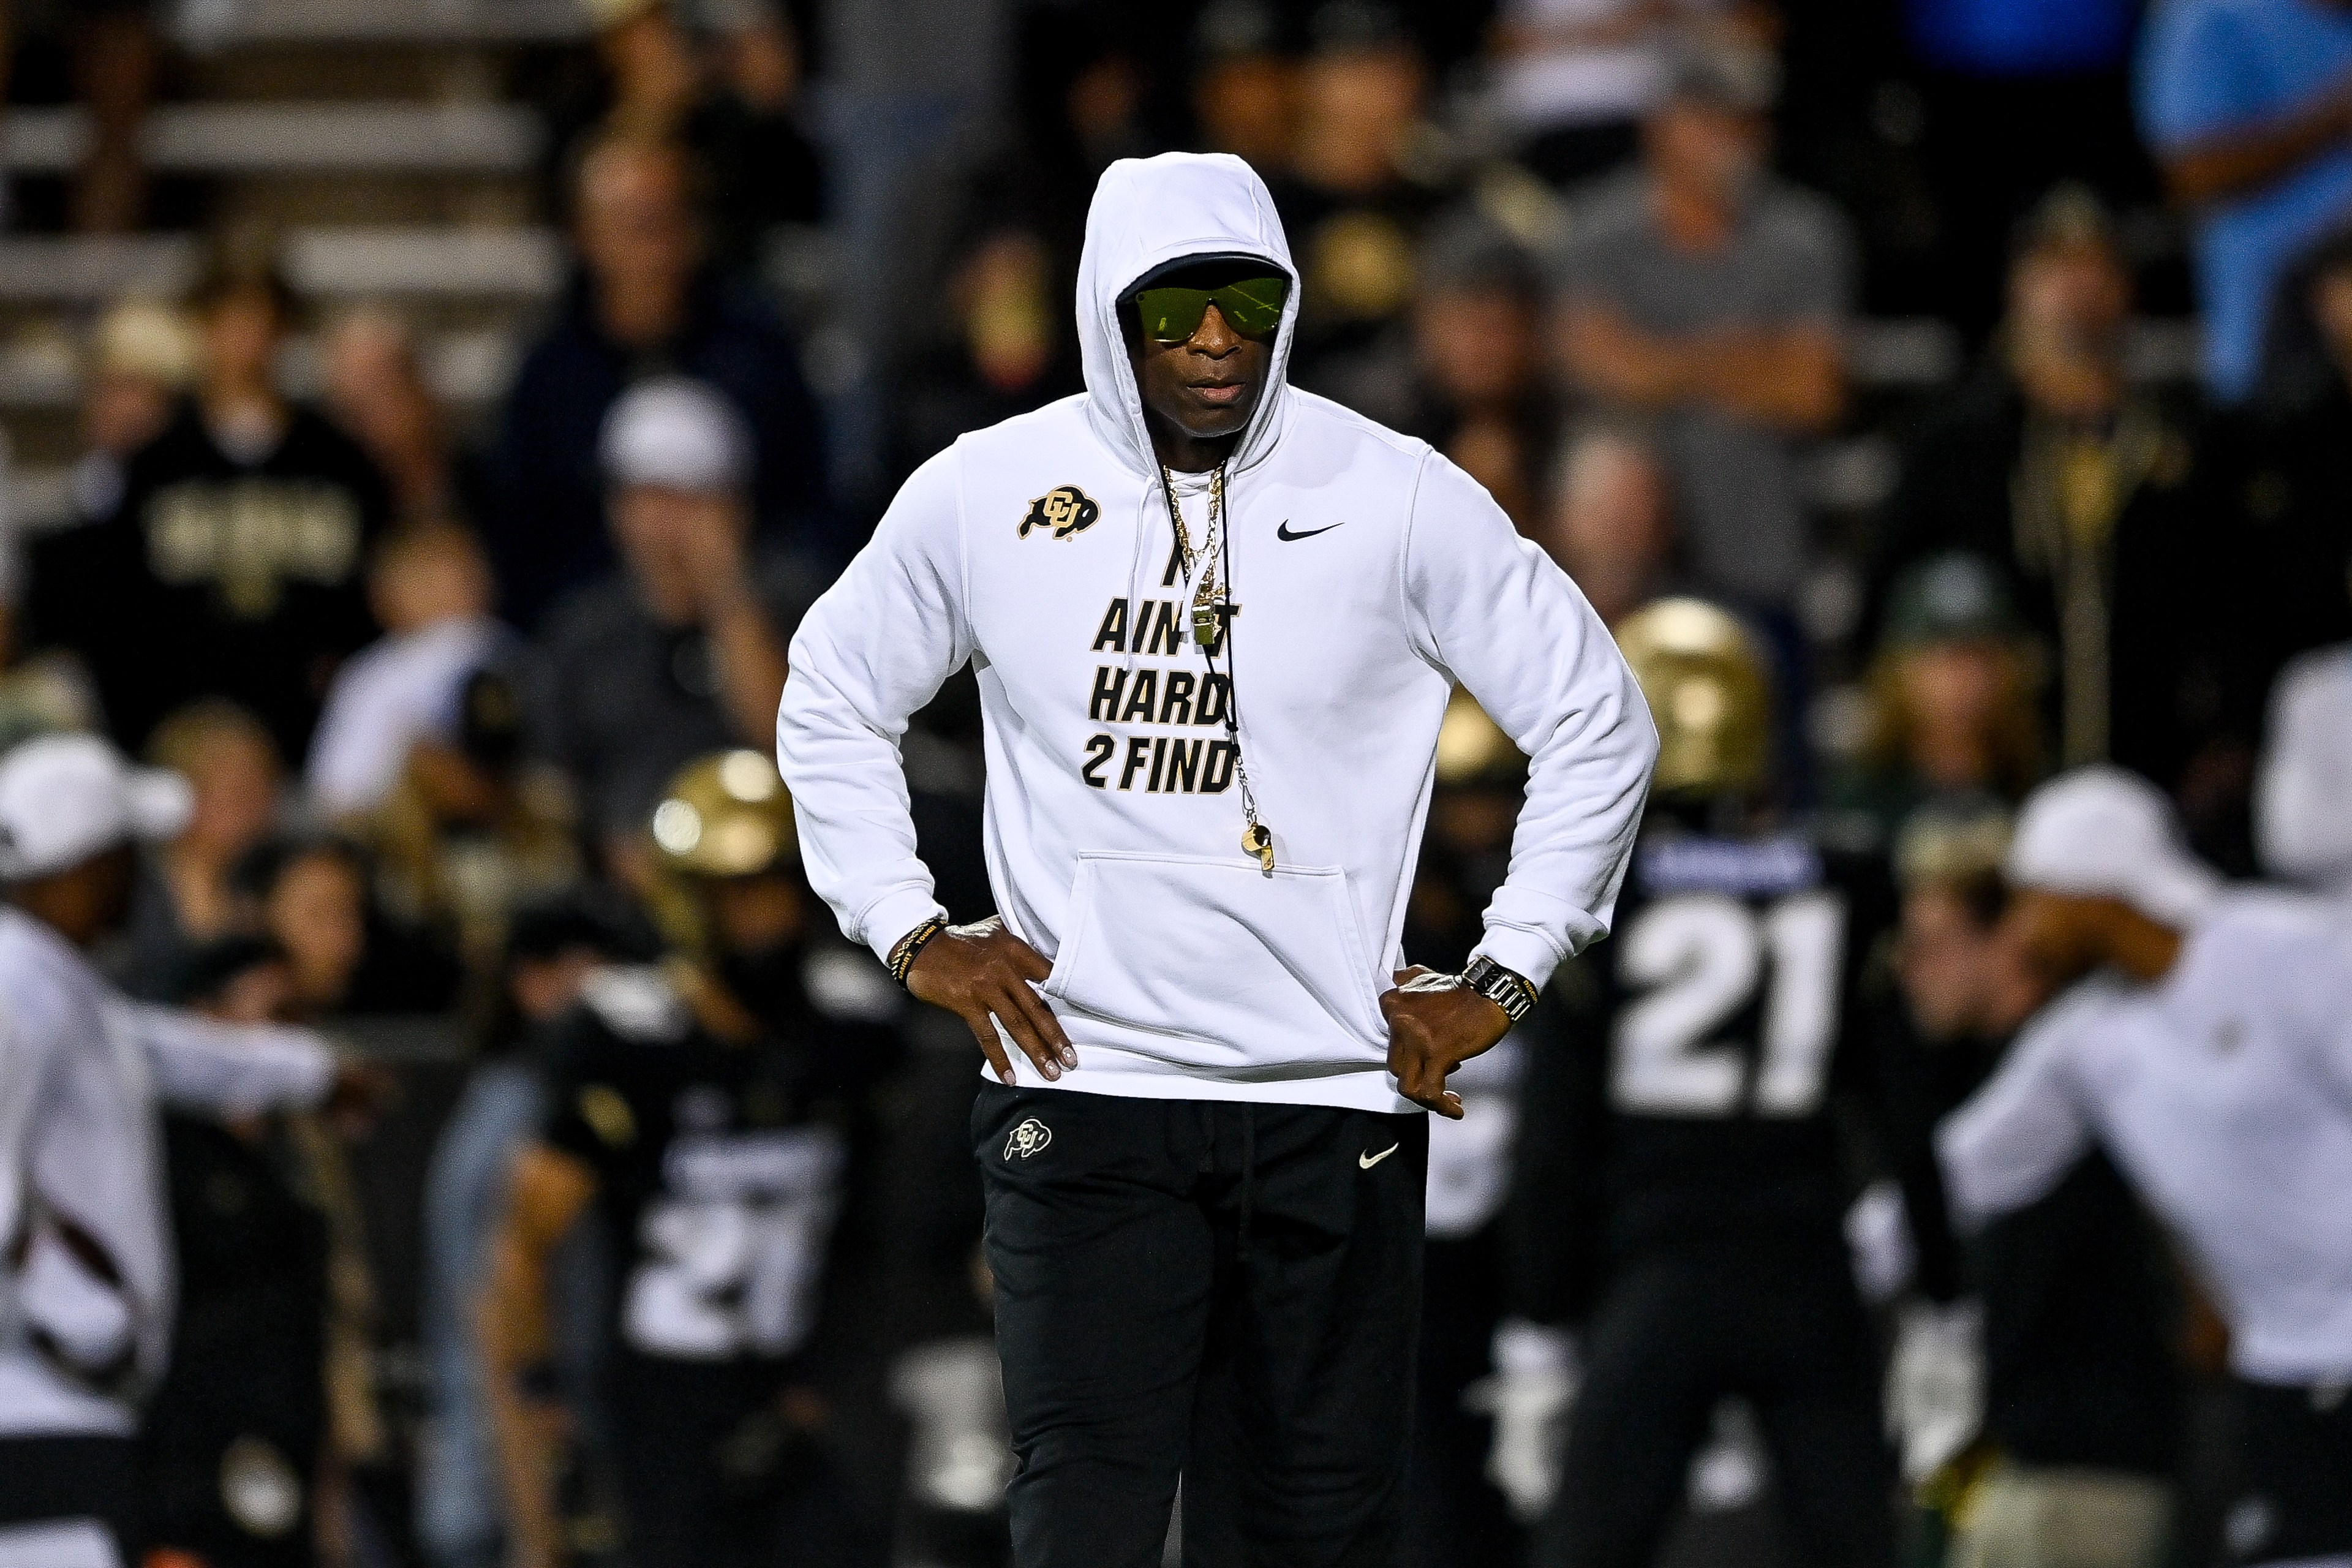 Head coach Deion Sanders of the Colorado Buffaloes walks on the field as players warm up before a game against the Colorado State Rams at Folsom Field on September 16, 2023 in Boulder, Colorado.